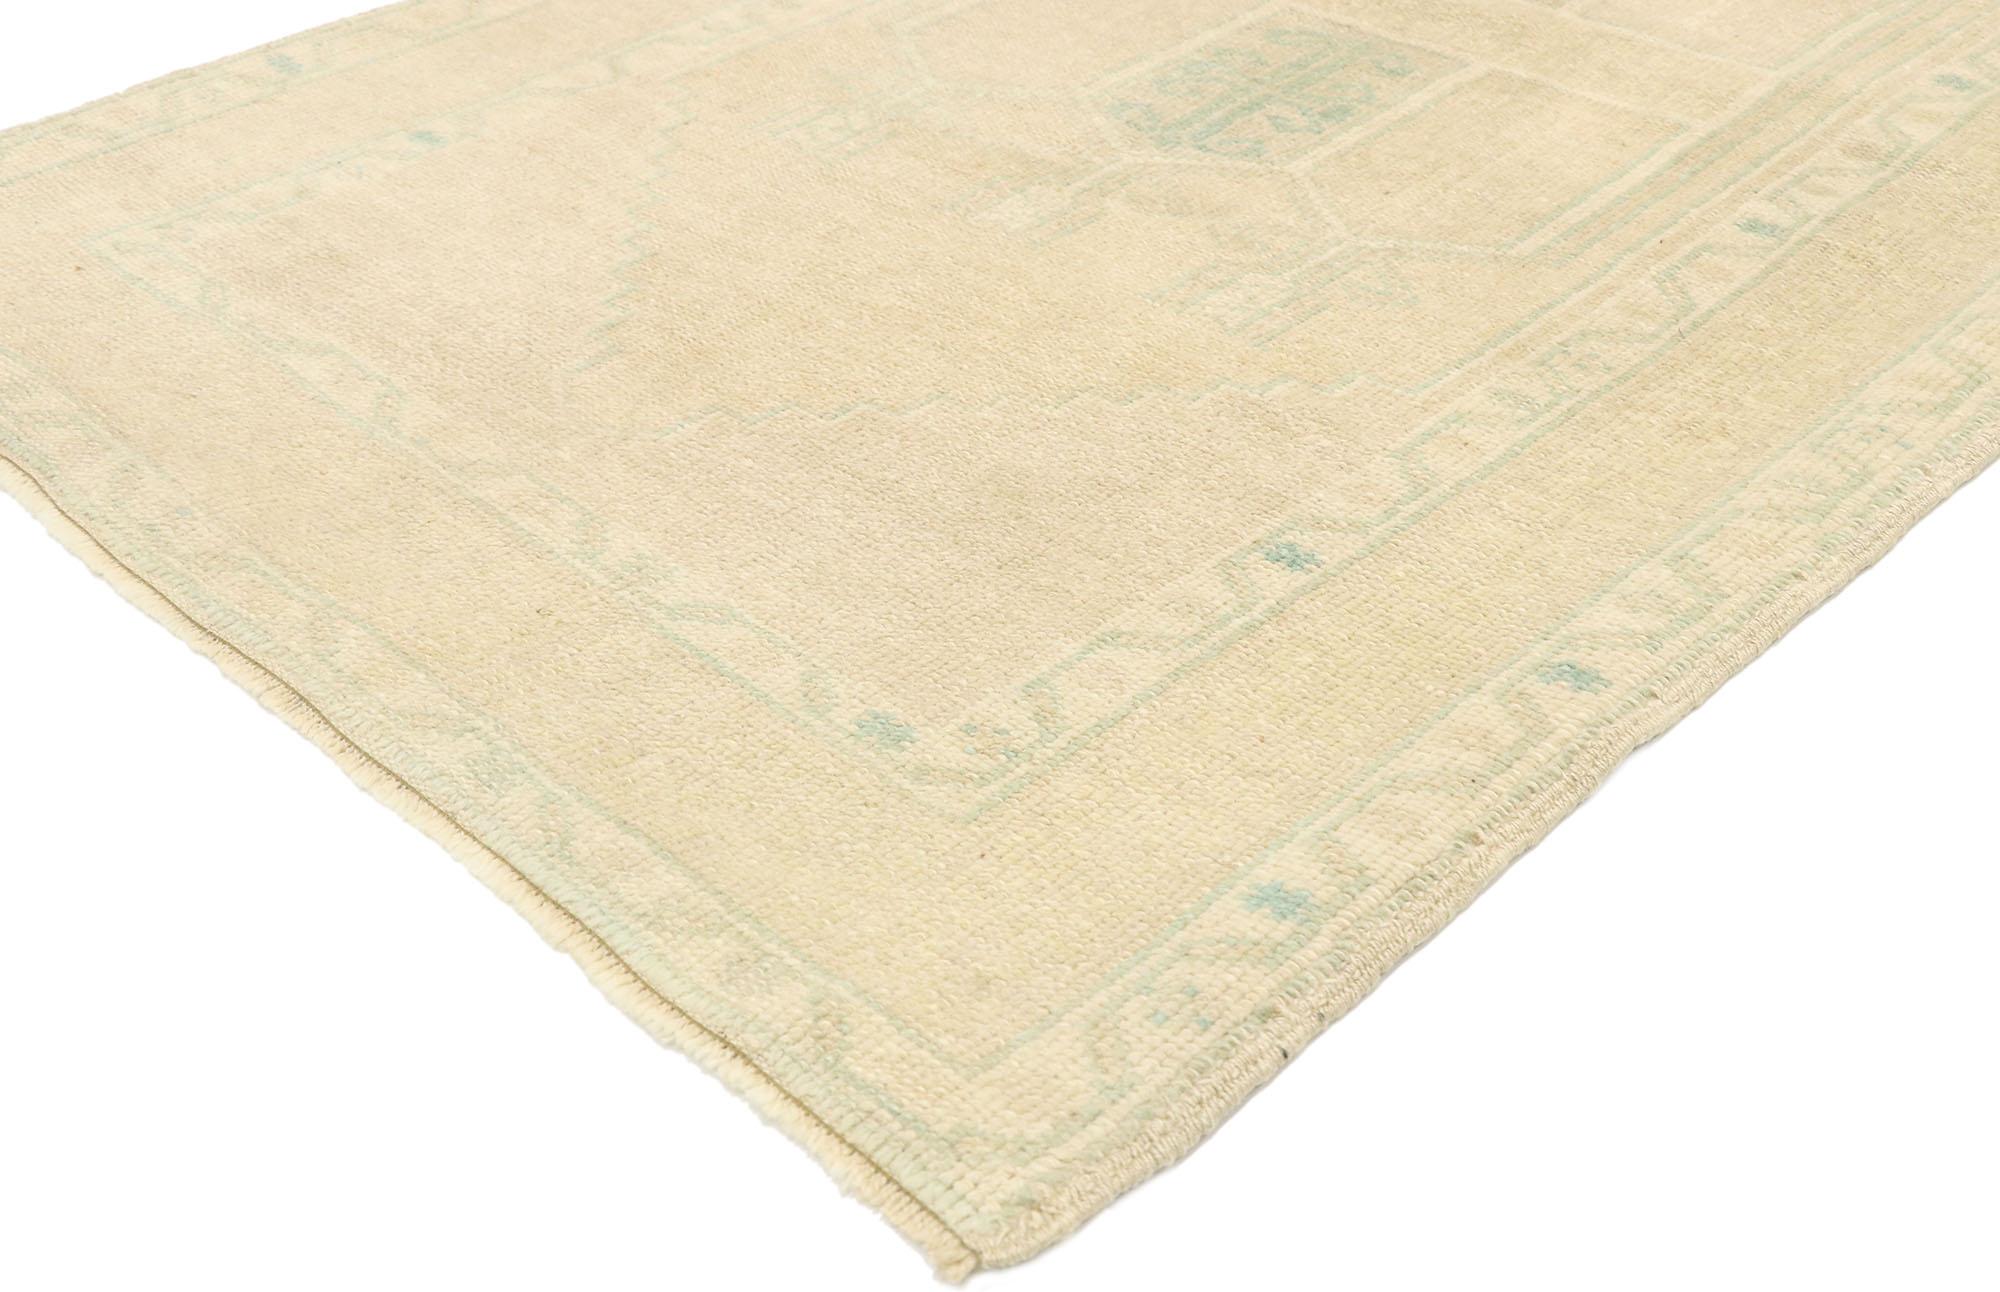 52968 vintage Turkish Prayer rug, Anatolian Double Mihrab carpet. Effortless beauty and soft, bespoke vibes meet minimalist French Country Cottage style in this hand knotted wool vintage Turkish prayer rug. The khaki-beige antique washed field